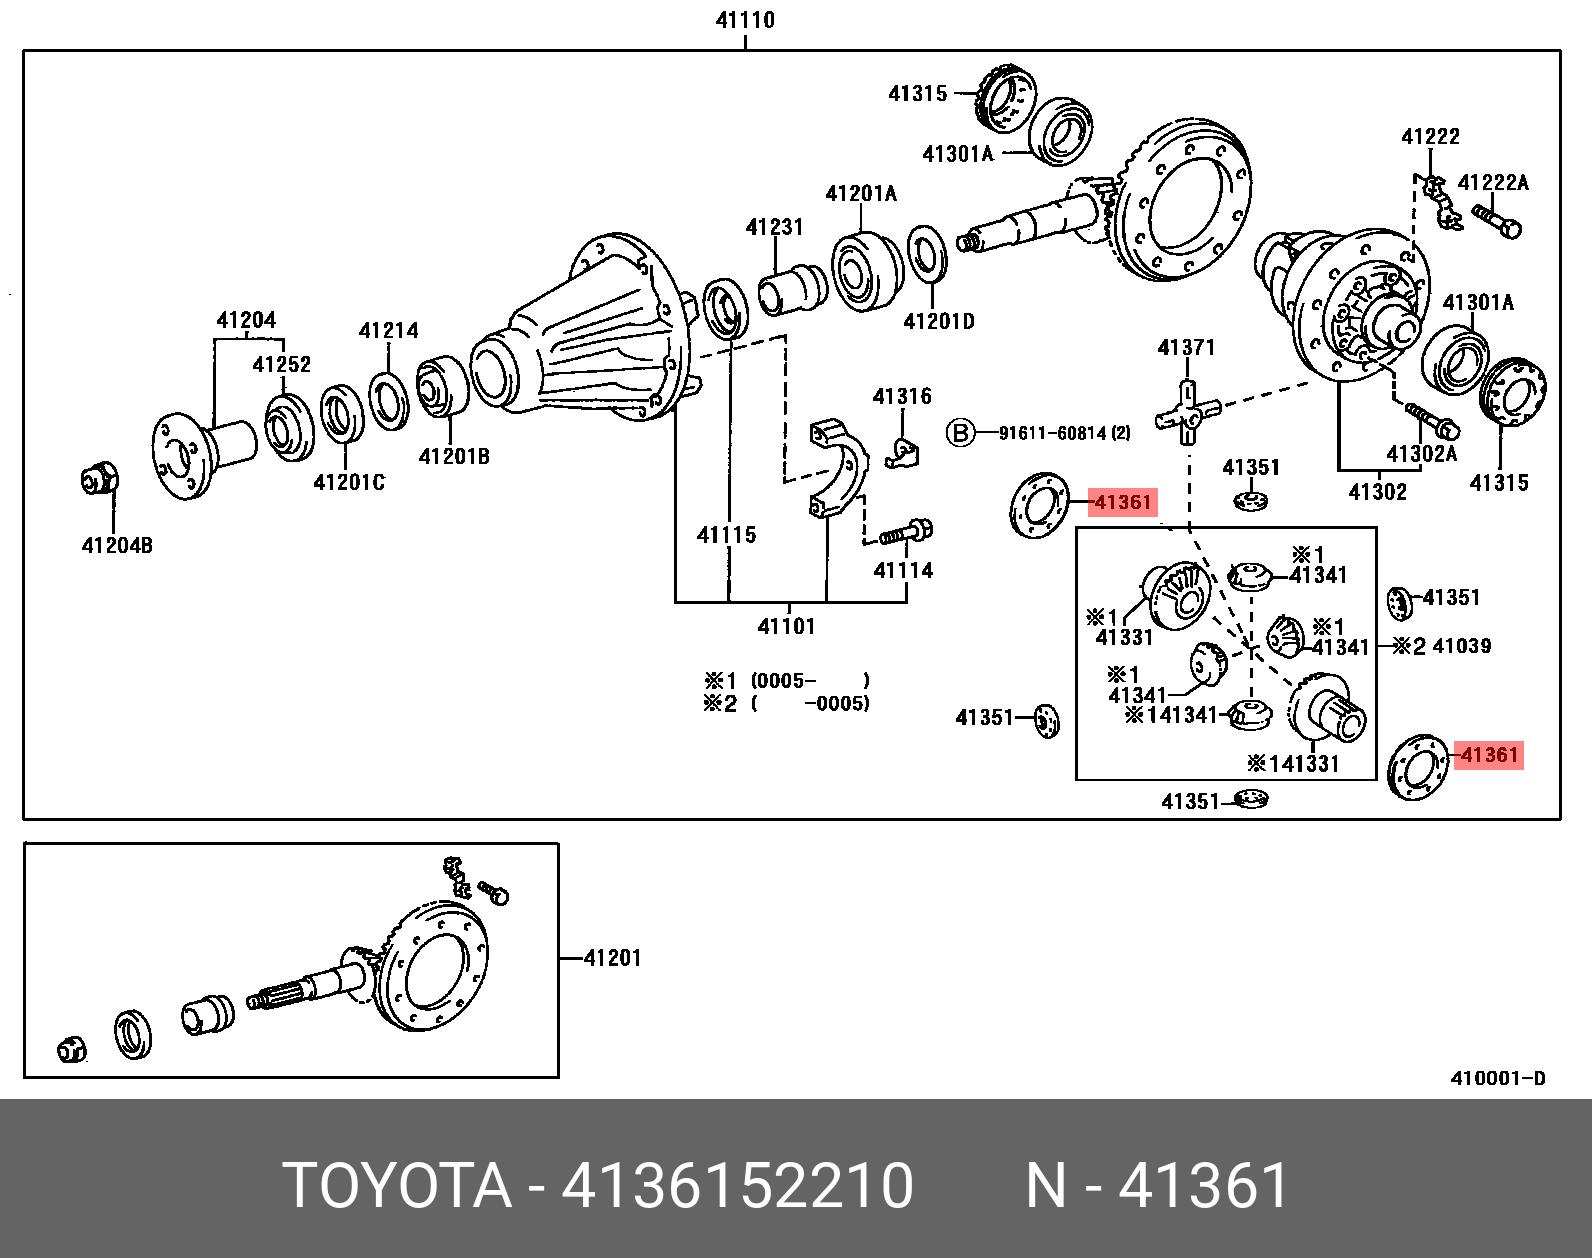 4136152210, YARIS 202002-, KSP210, MXPA1#, MXPH1#, WASHER, REAR DIFFERENTIAL SIDE GEAR THRUST, NO.1